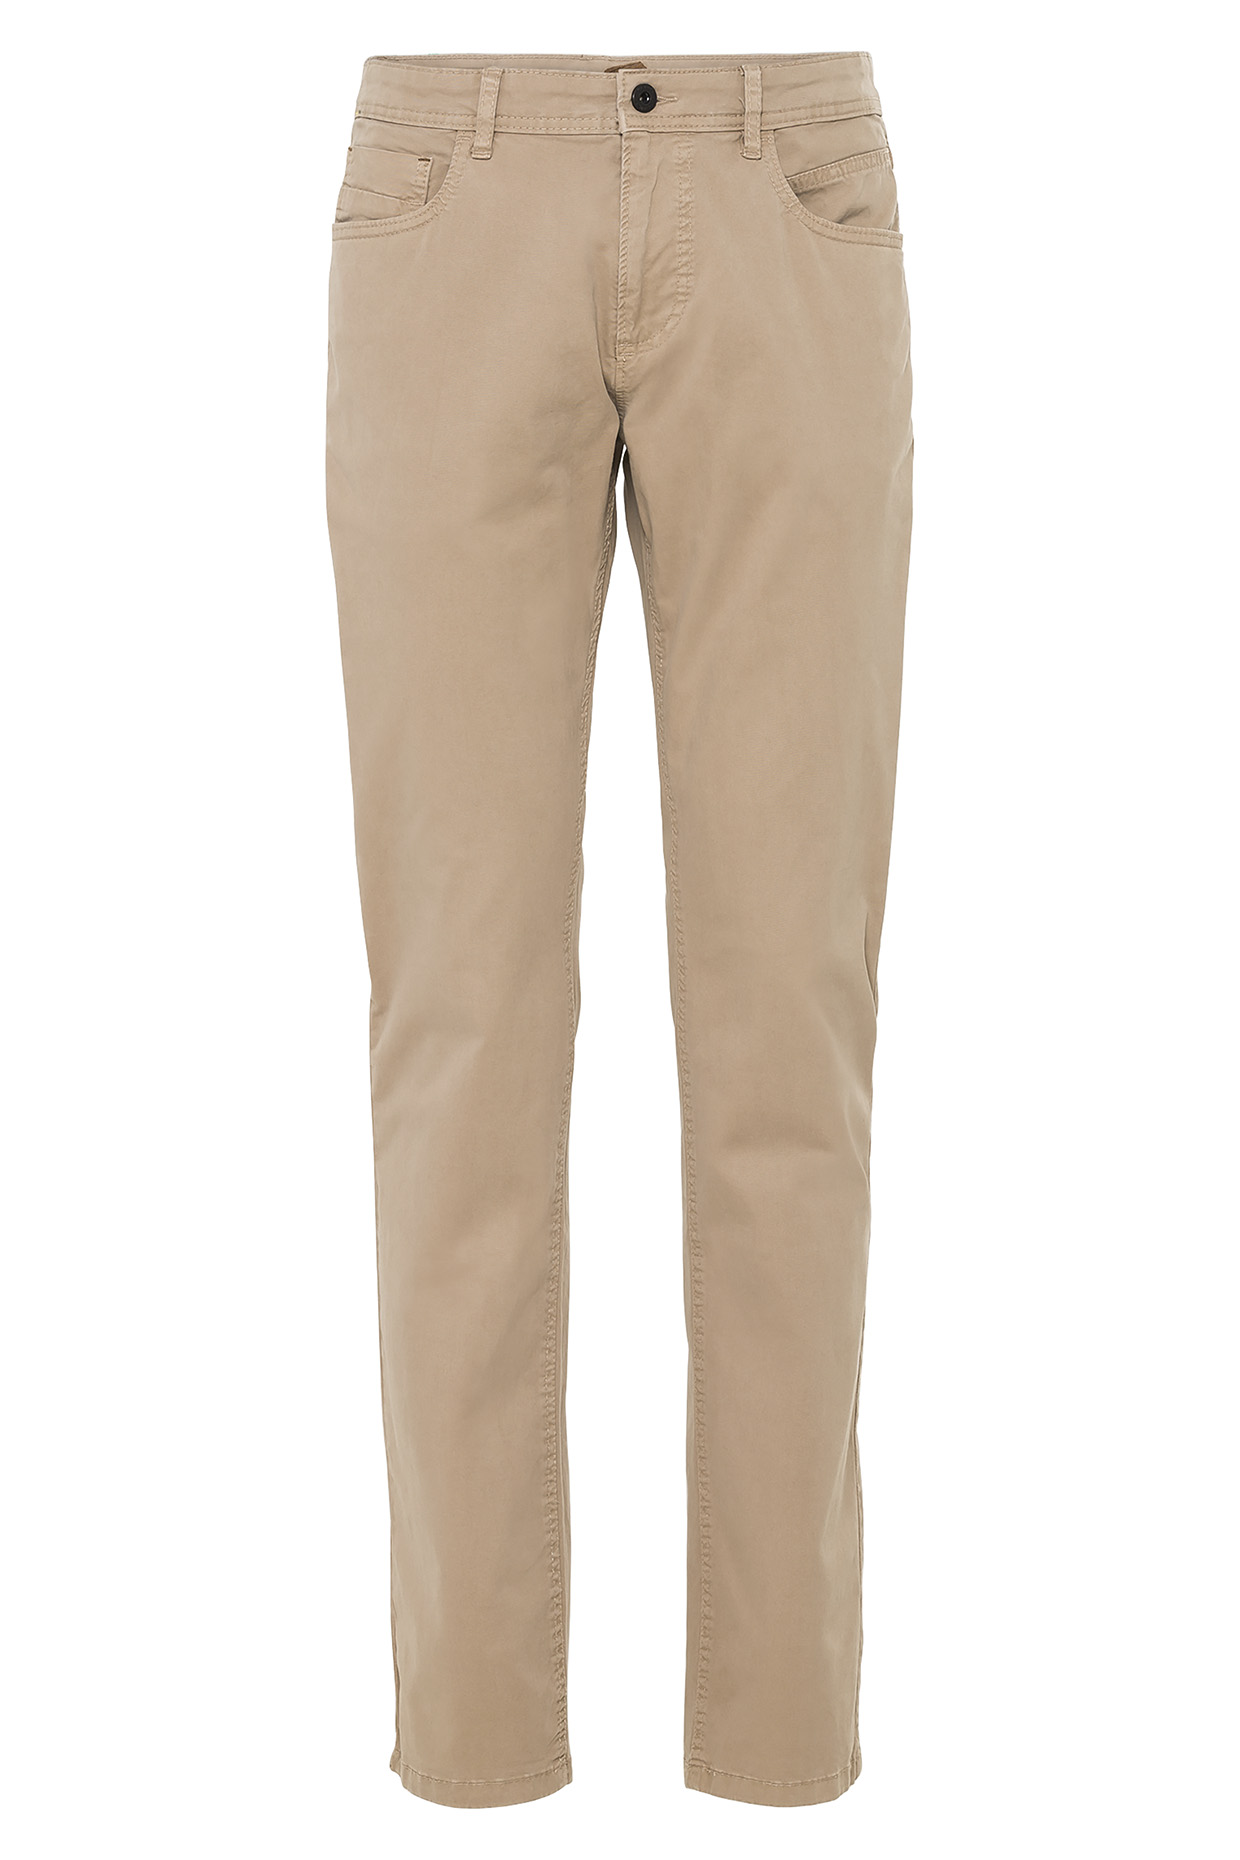 Trousers • Activelook • Camel Active Cyprus • Discover our product ...